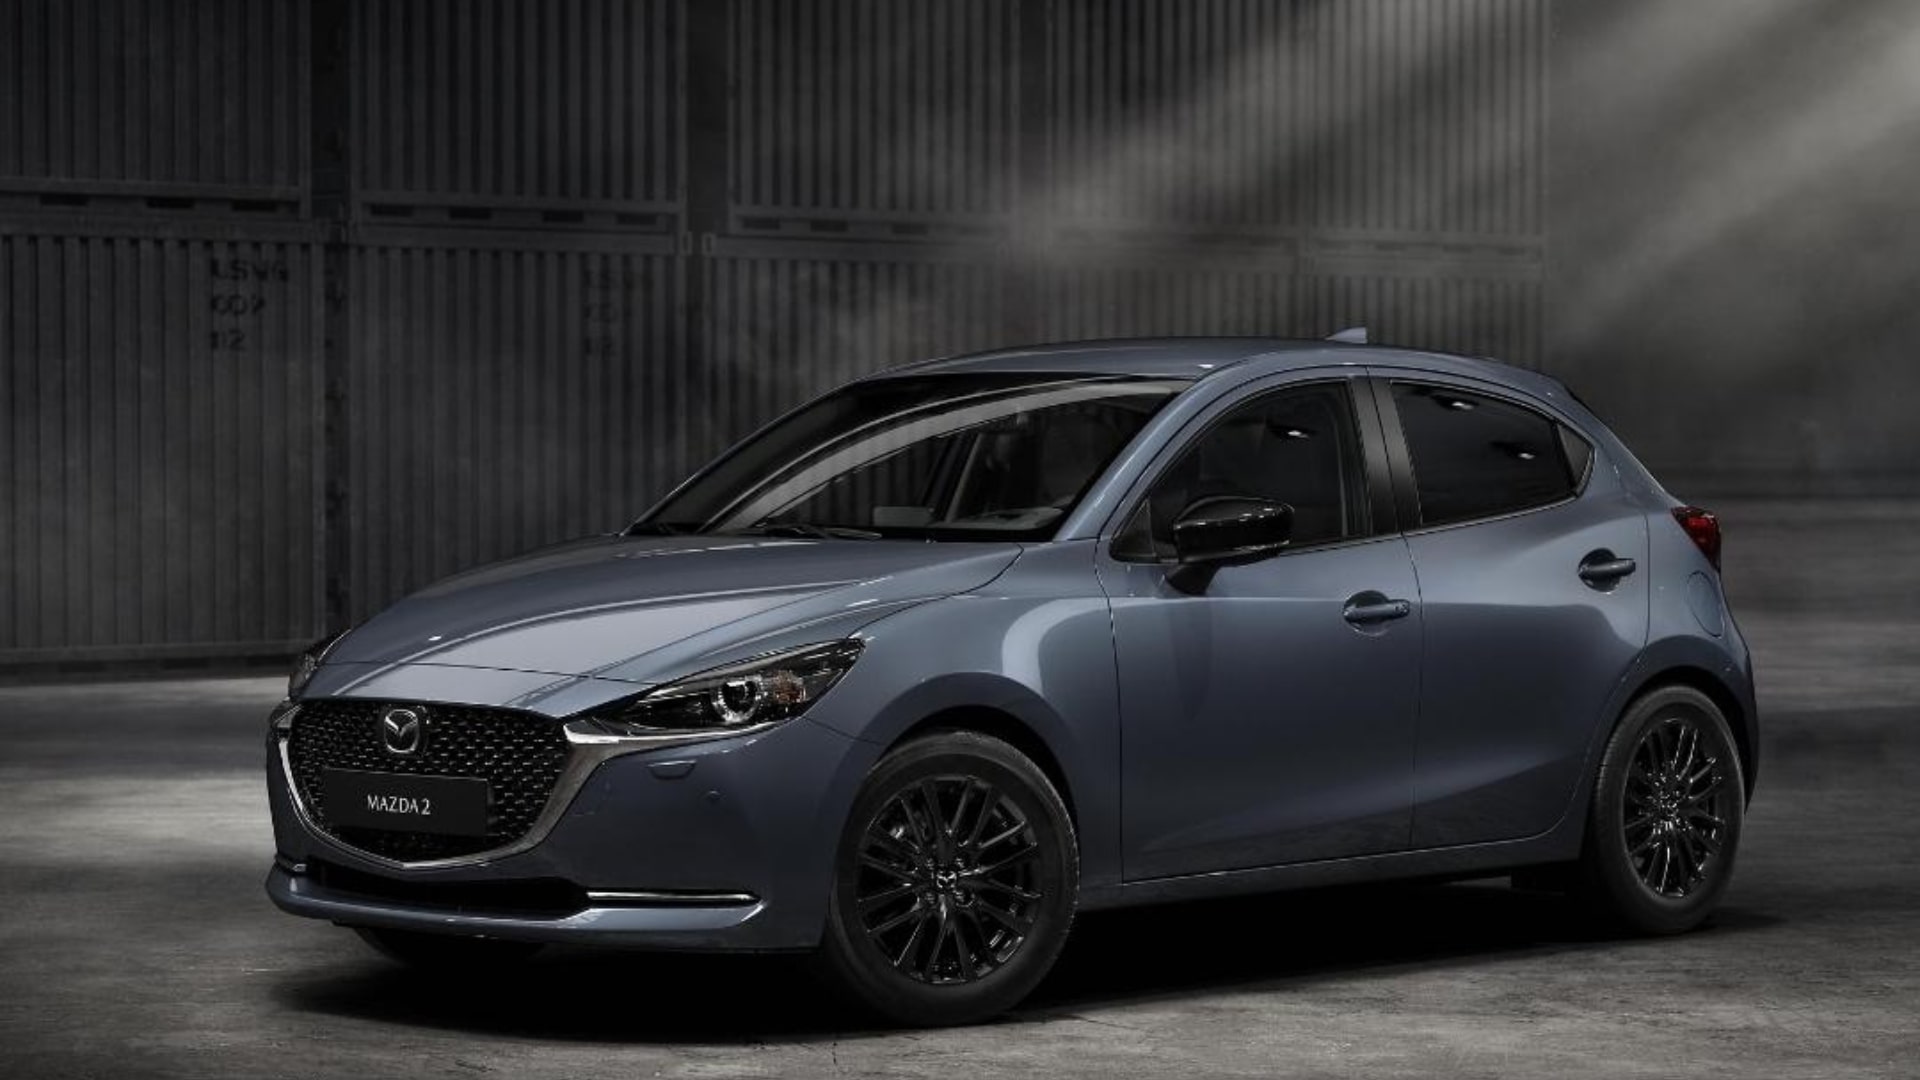 Mazda 2 Safety Features That Make Your Car Feel As Safe As Home